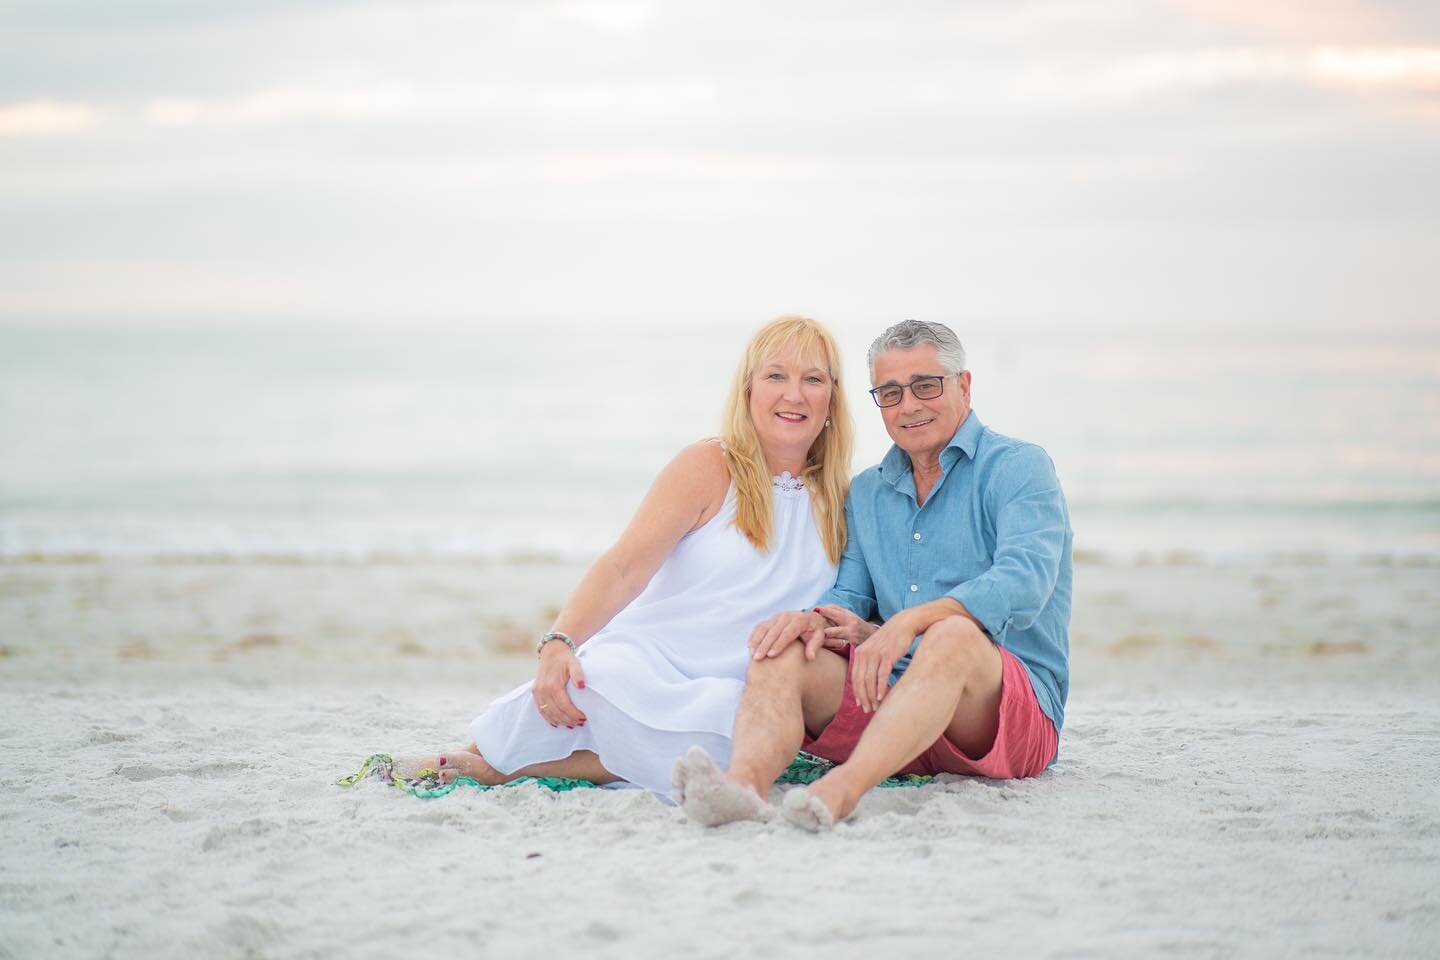 A sunset photo session is a great way celebrate 30 years of marriage!